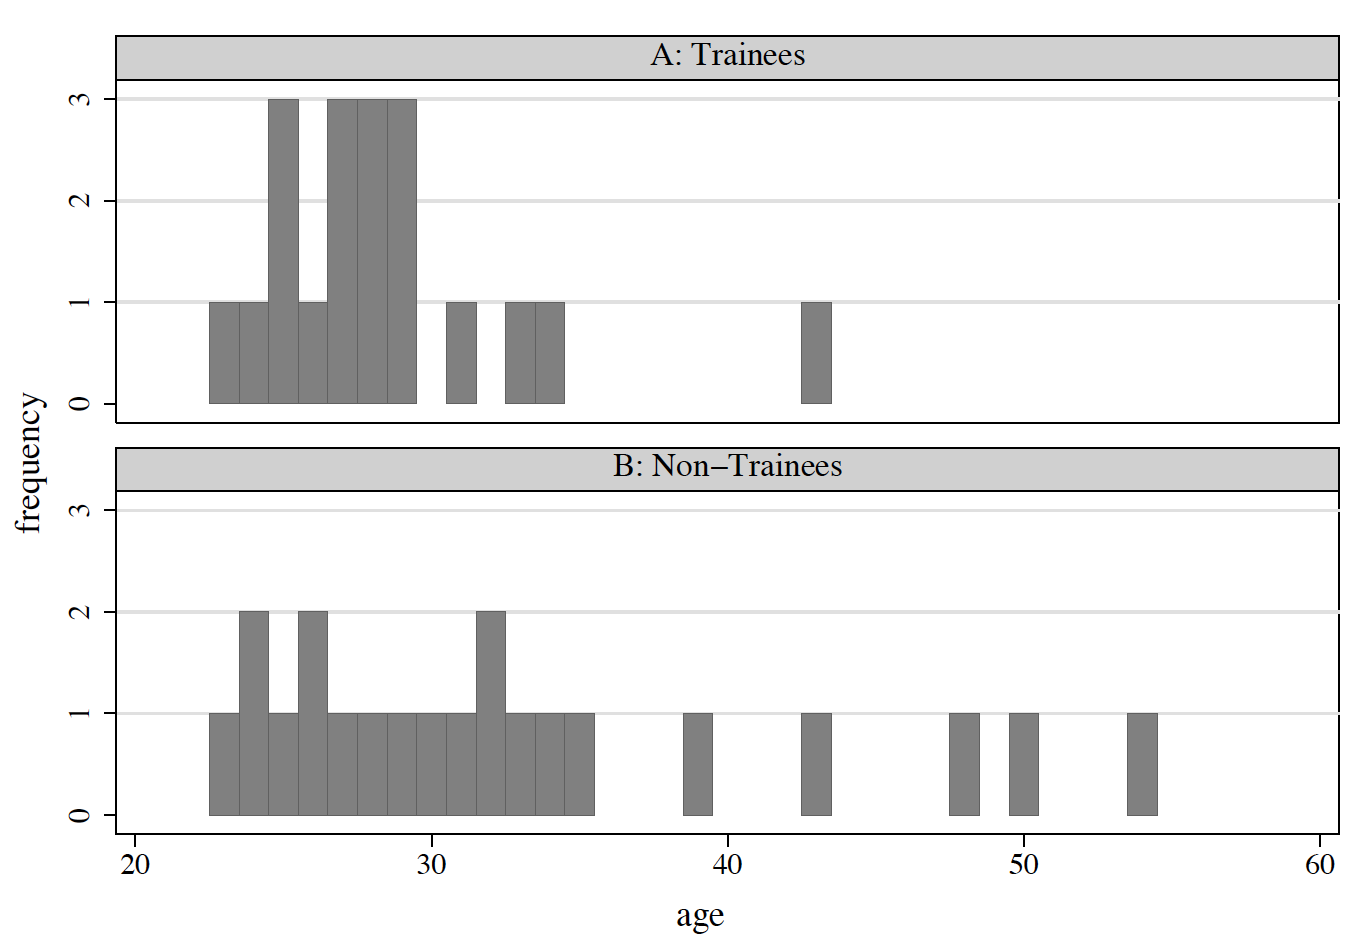 Age Distributions: Before Matching